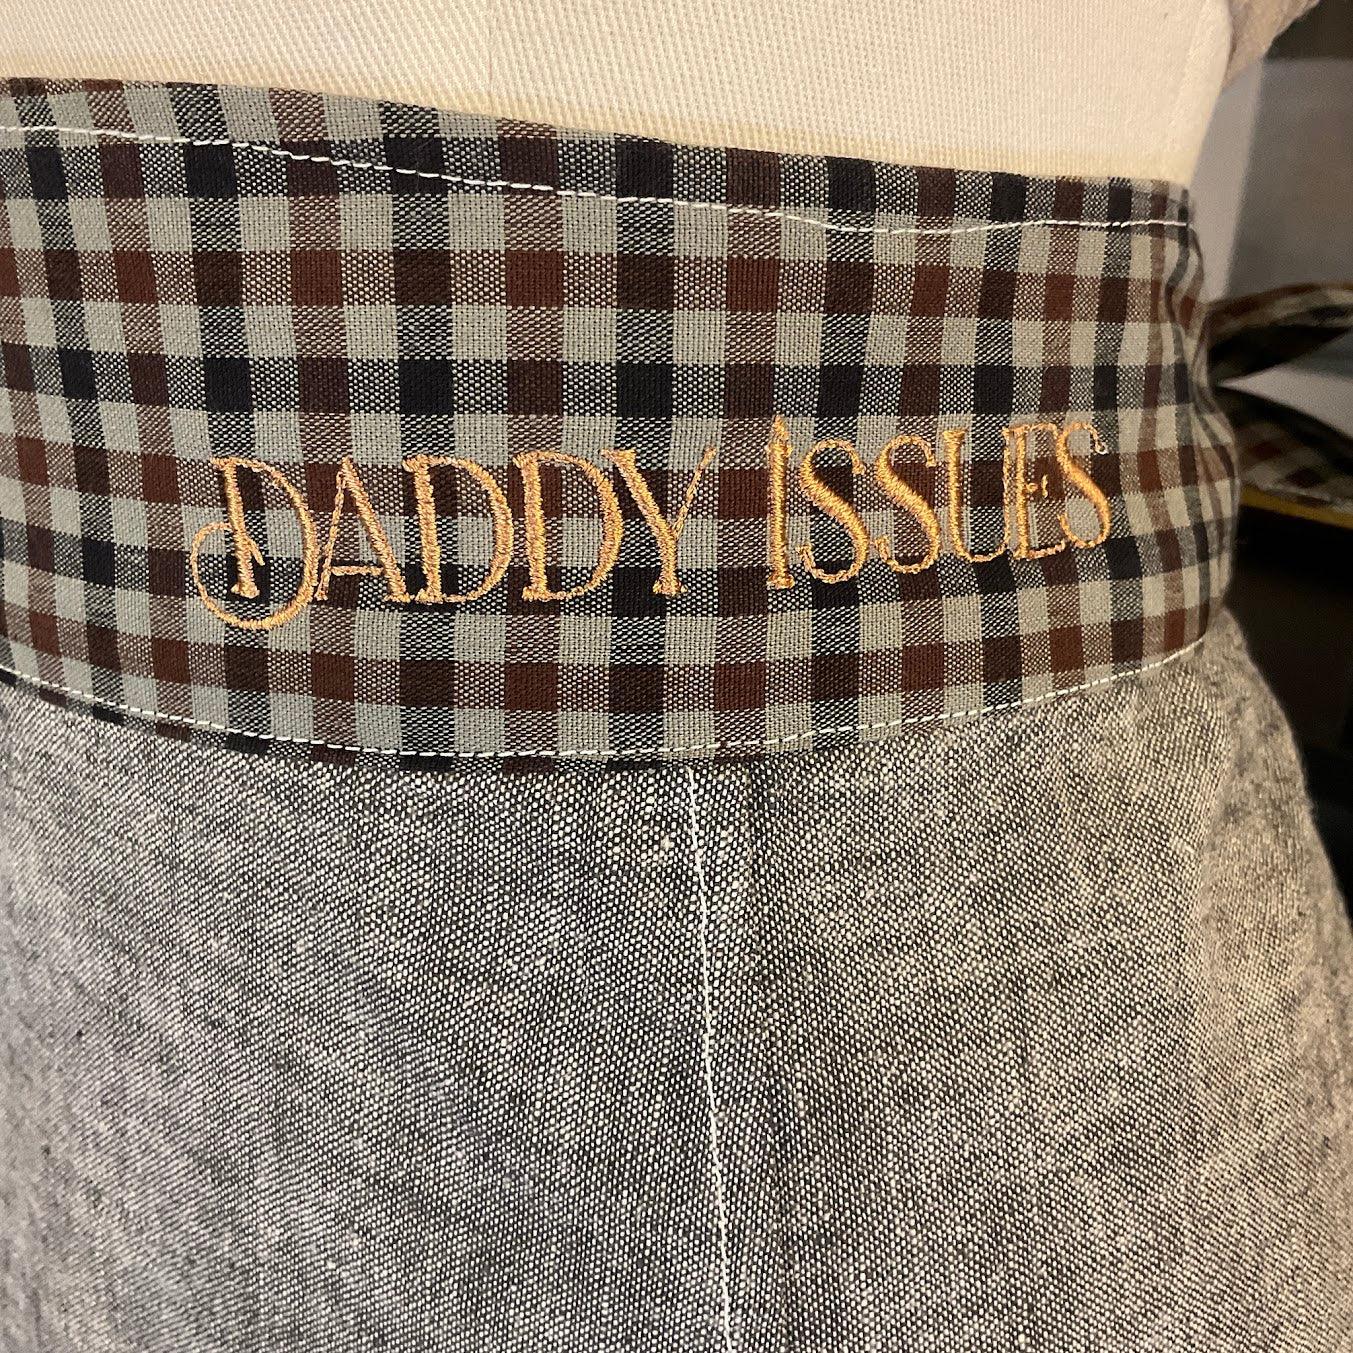 Daddy Issues Apron - Offensively Domestic